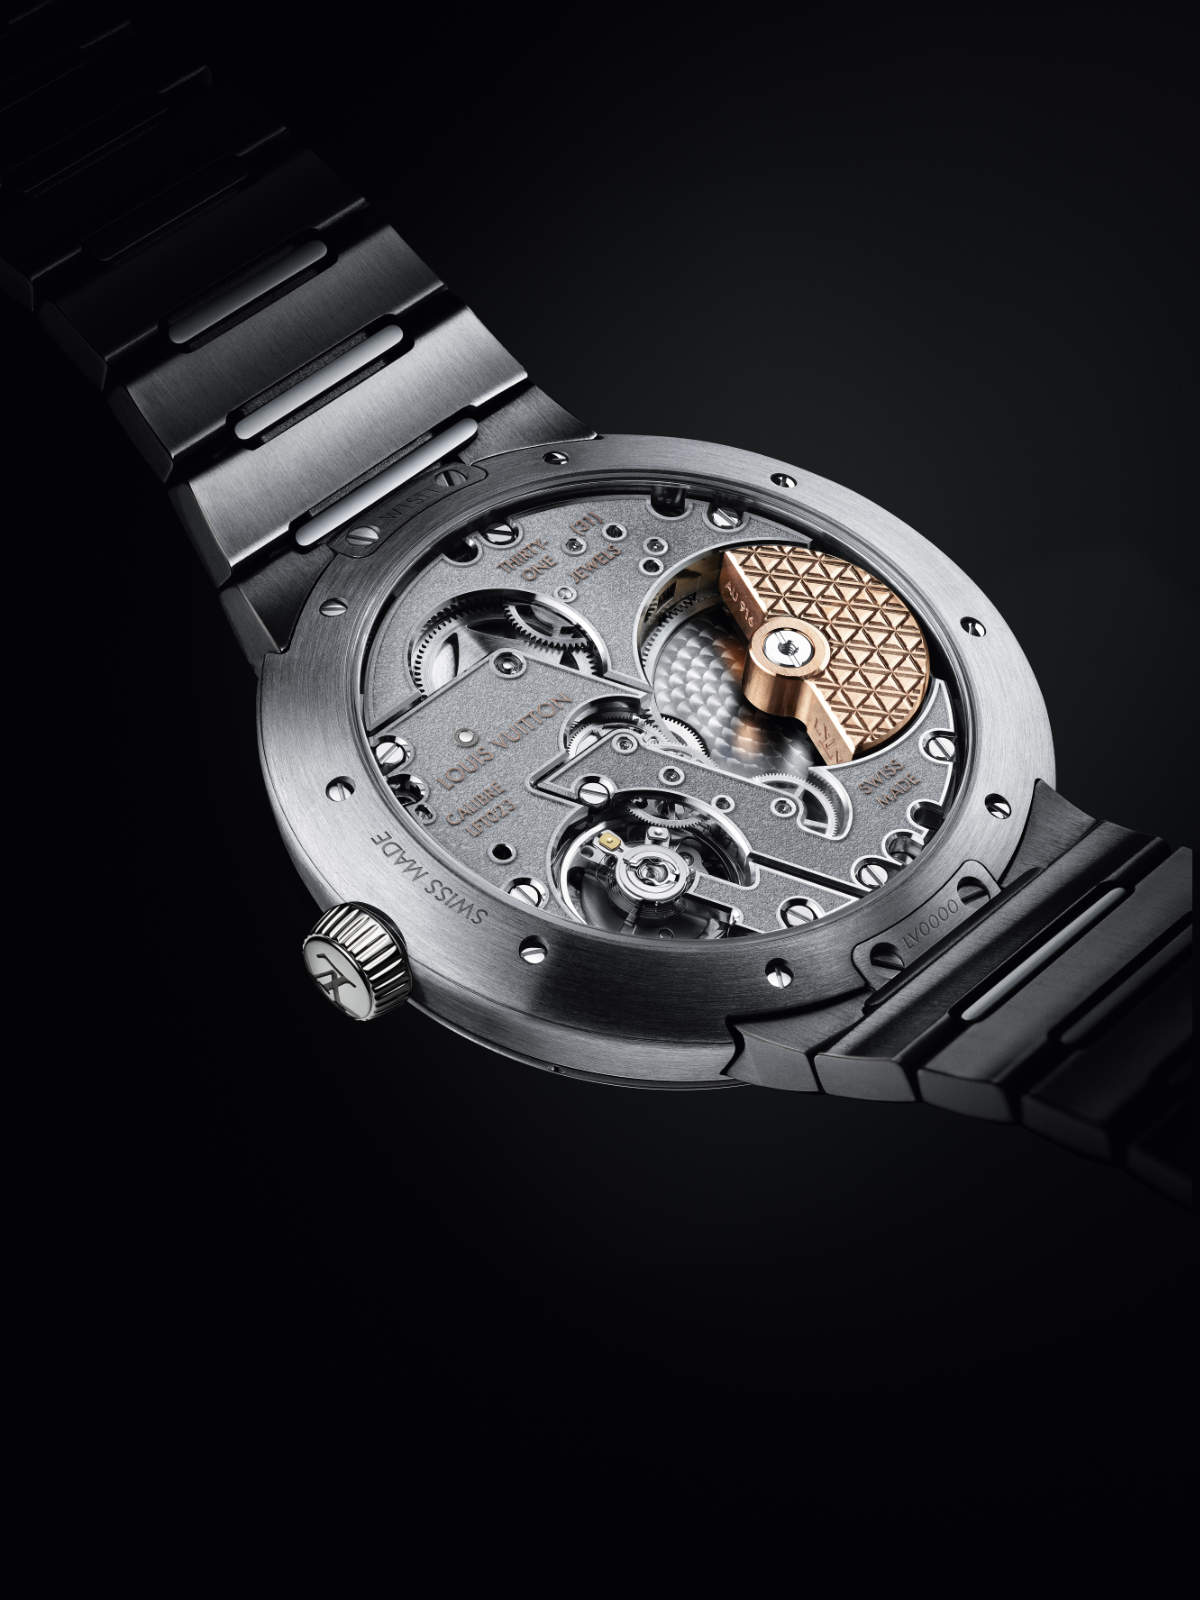 Time for a Change! Louis Vuitton Introduces the New Tambour Watch